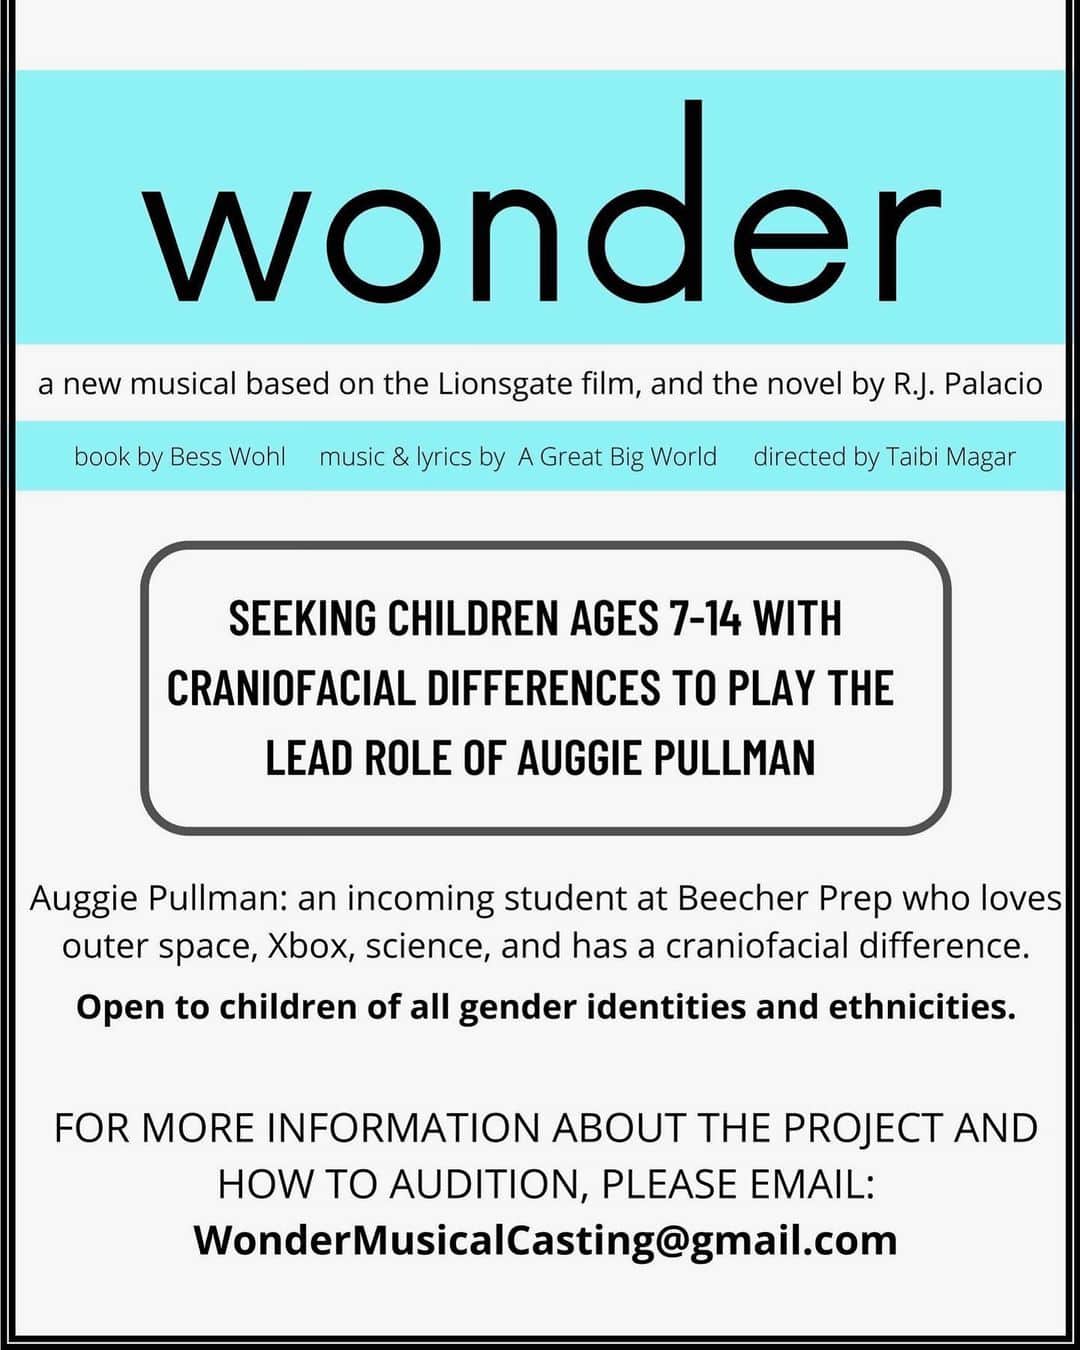 A Great Big Worldのインスタグラム：「Hi! Big announcement! We are so excited to finally share with you that we're working on the musical Wonder, based on the novel by R.J. Palacio and Lionsgate film. It's such a powerful story about acceptance, compassion, friendship, and kindness and we are incredibly proud to be a part of it, and to be working with such an amazing team.  We are beginning the casting process for the musical and need your help! We're doing virtual auditions for Auggie, the lead role, and are looking for children ages 7-14 with craniofacial differences. For more information and how to audition, please email WonderMusicalCasting@gmail.com. Please help spread the word!  Love you all and more soon. ian and chad」